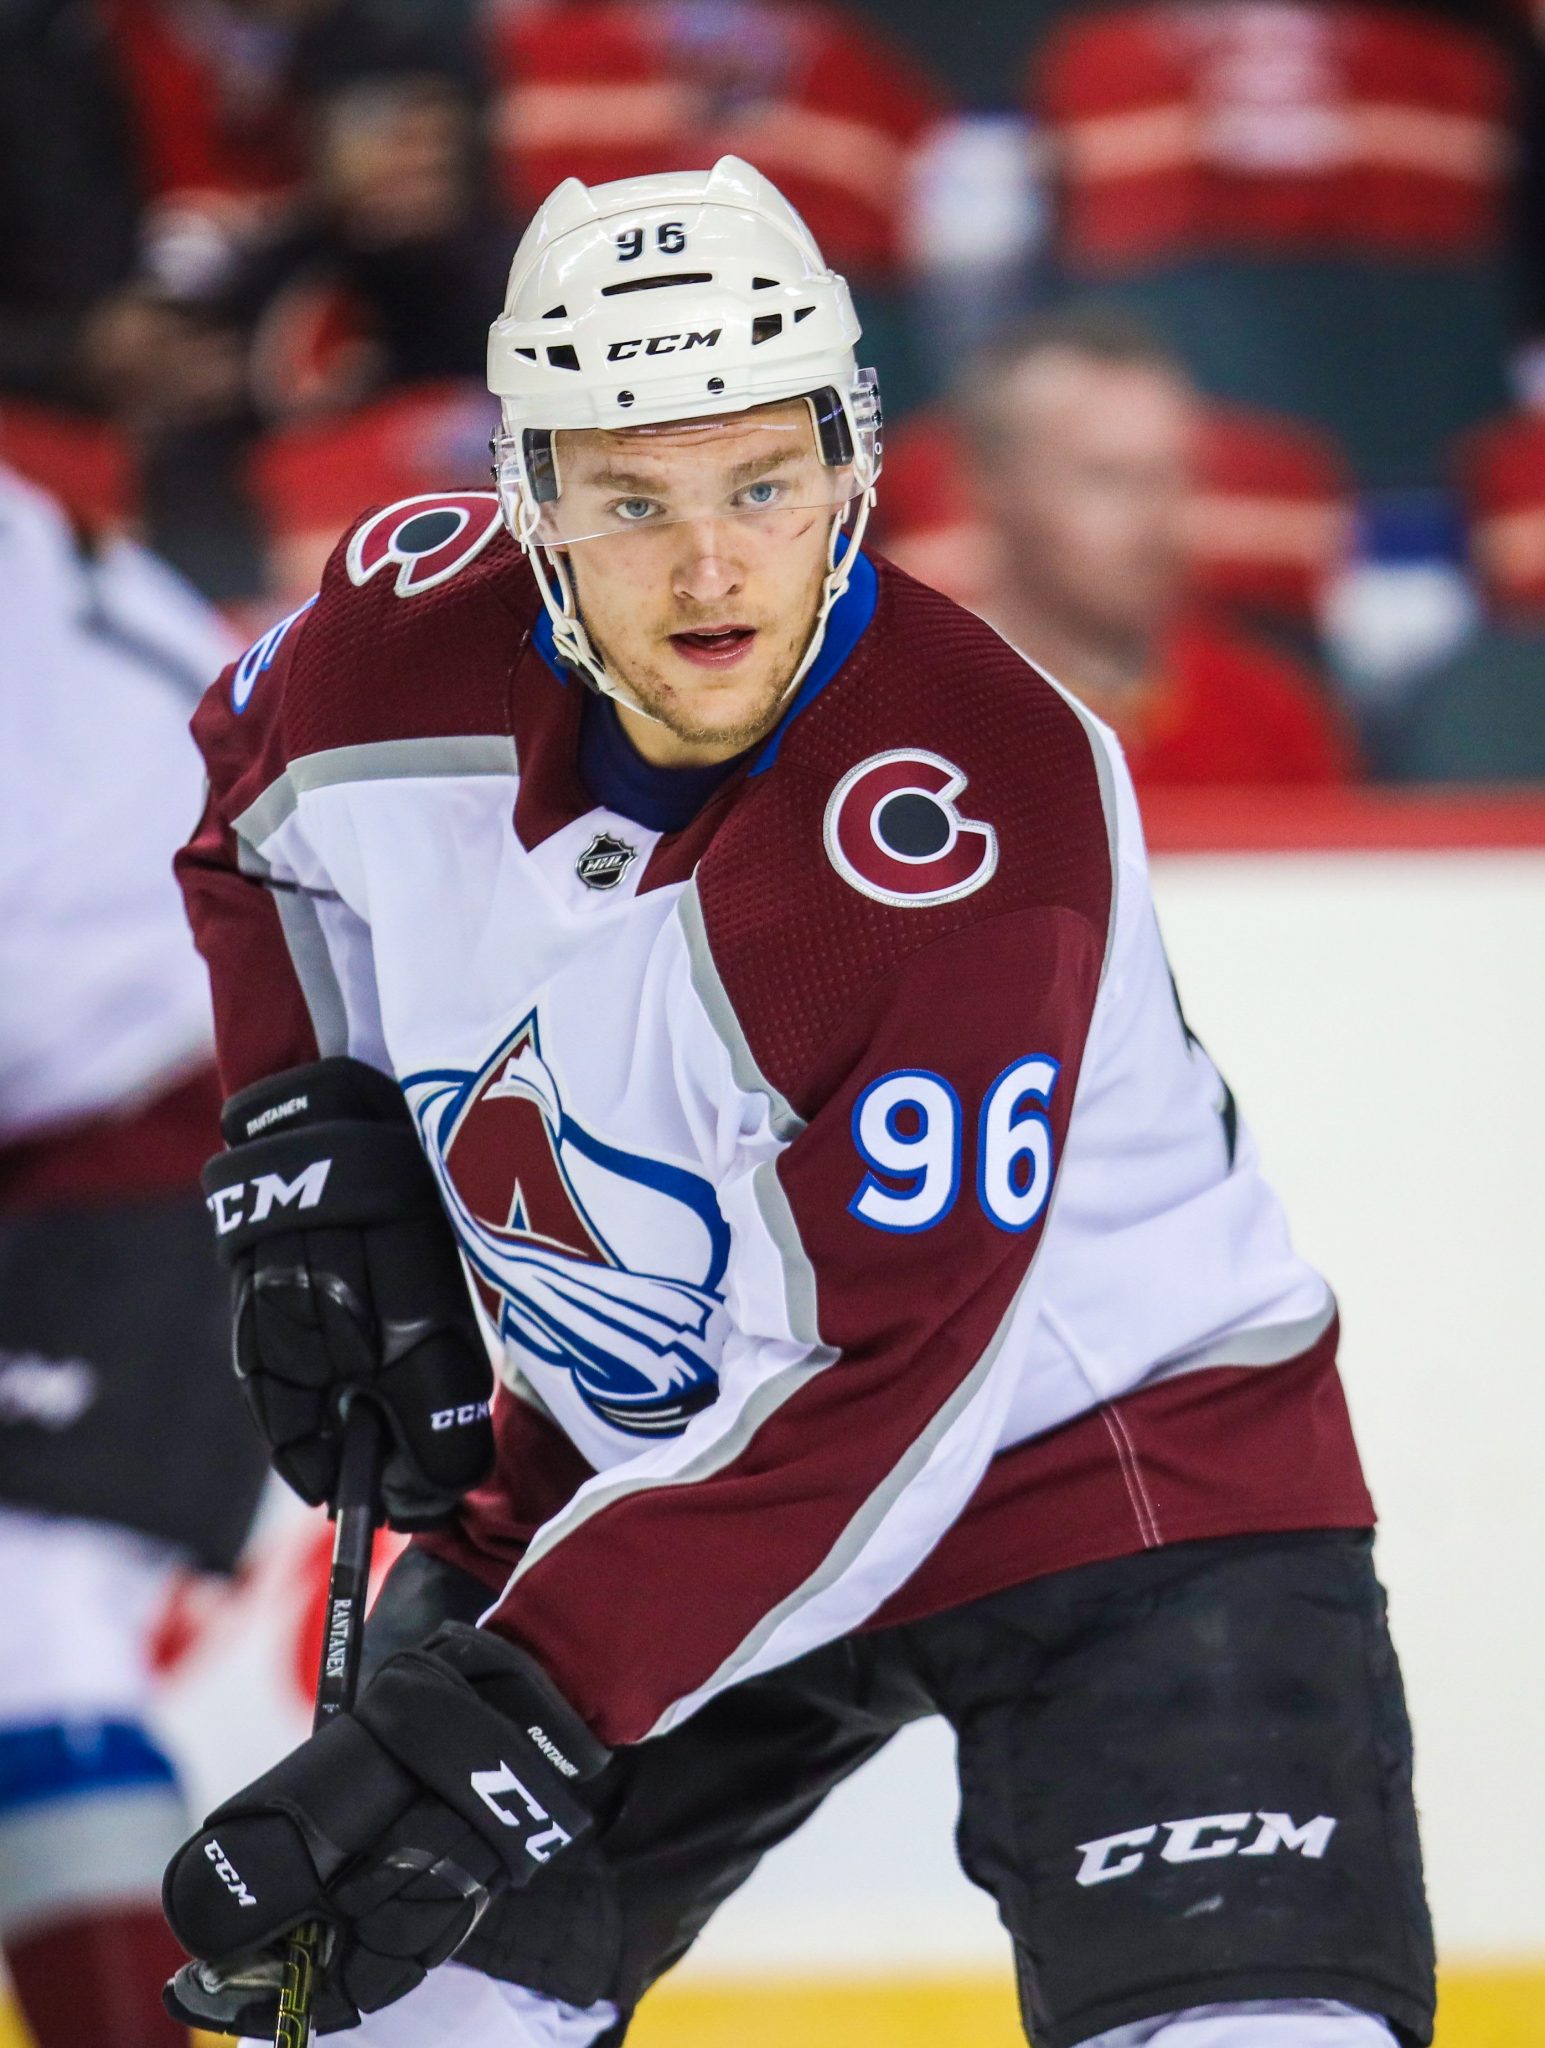 Mikko Rantanen notches second NHL career hat trick - The Sports Daily